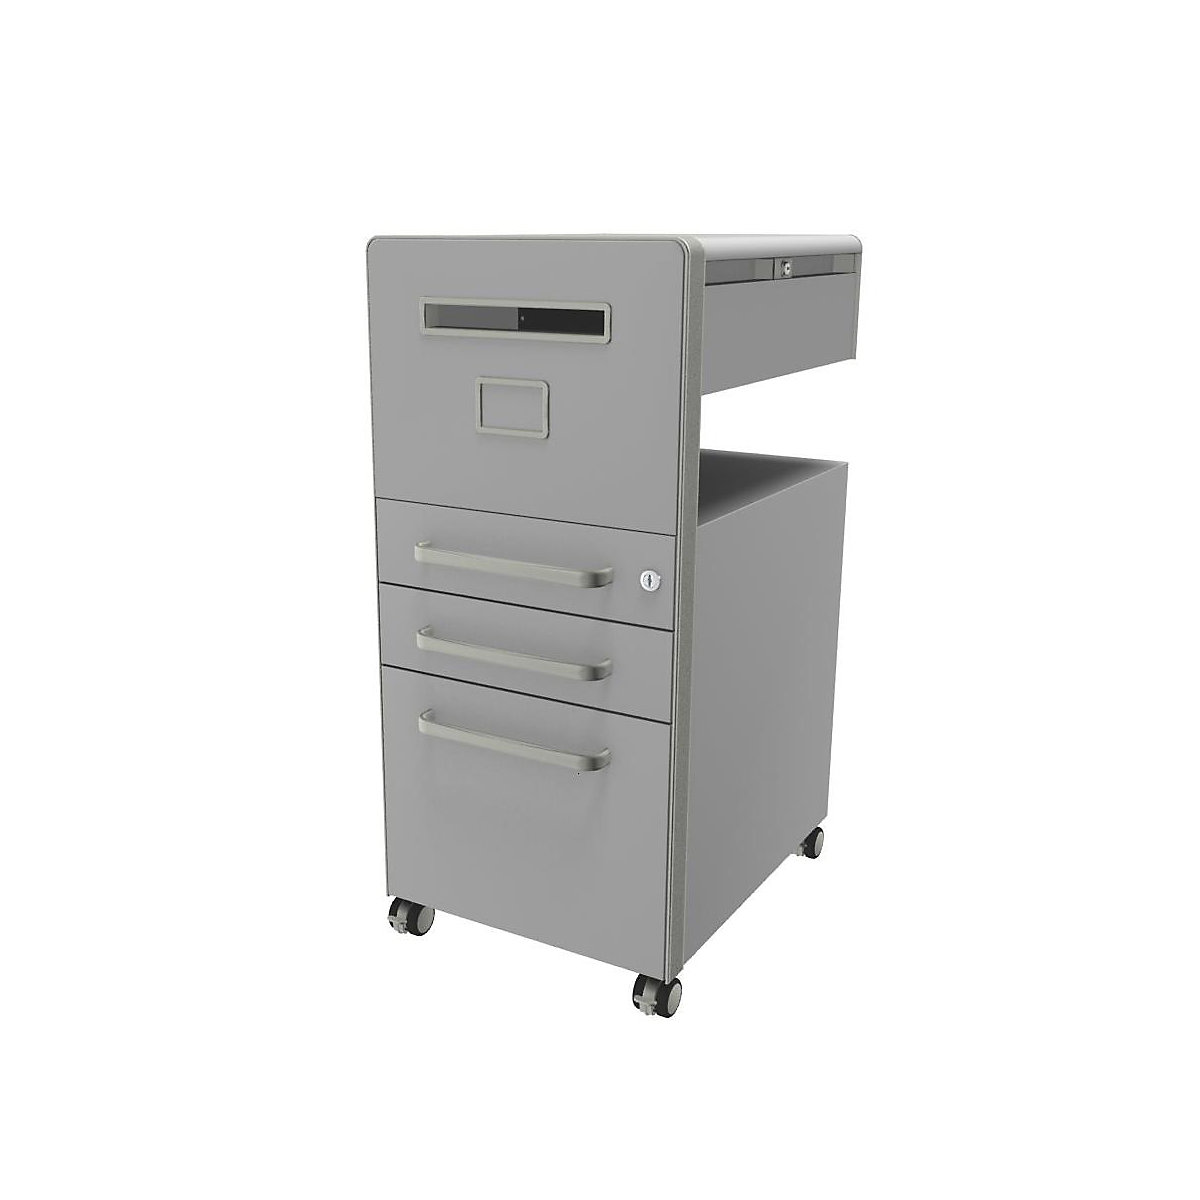 Bite™ pedestal furniture, with 1 whiteboard, opens on the left side – BISLEY, with 2 universal drawers, 1 suspension file drawer, light grey-17